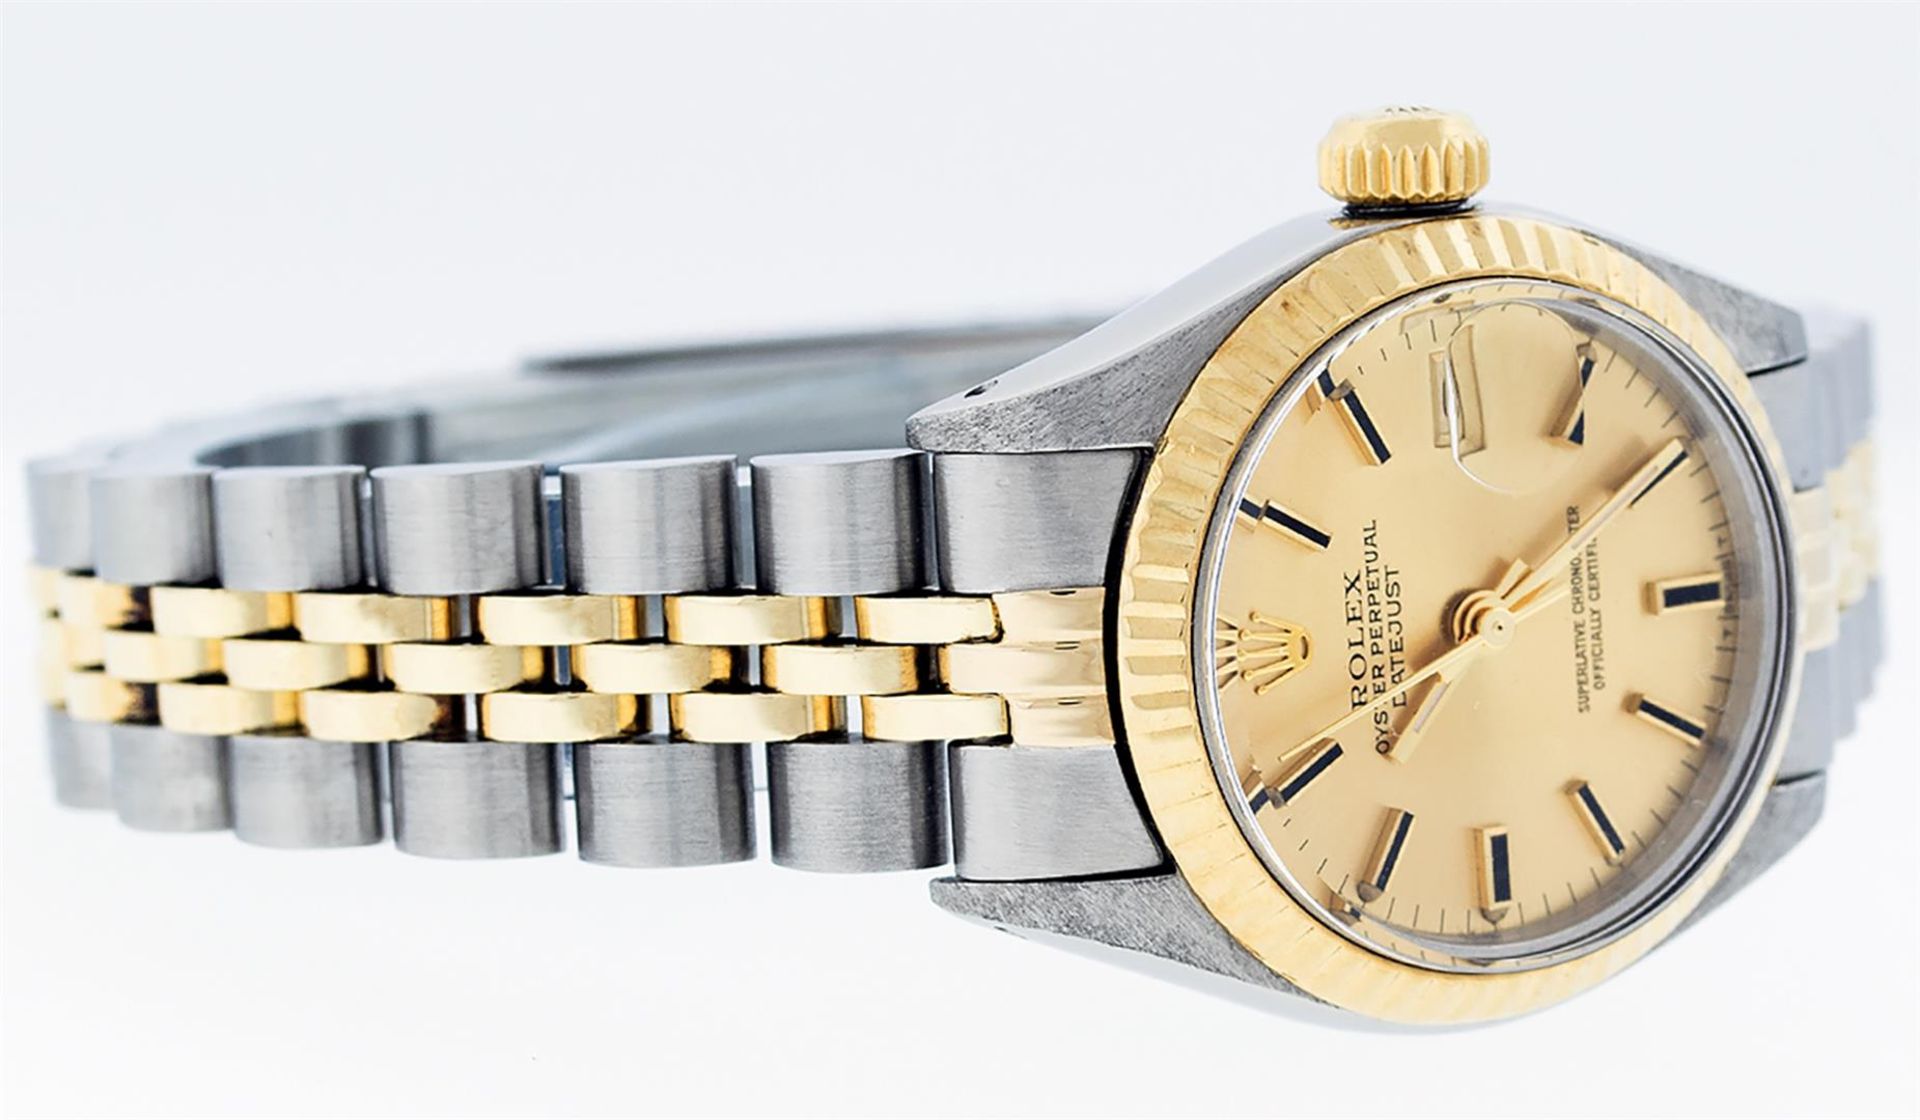 Rolex Ladies 2 Tone Champagne Index 26MM Oyster Perpetual Datejust Wristwatch - Image 3 of 9